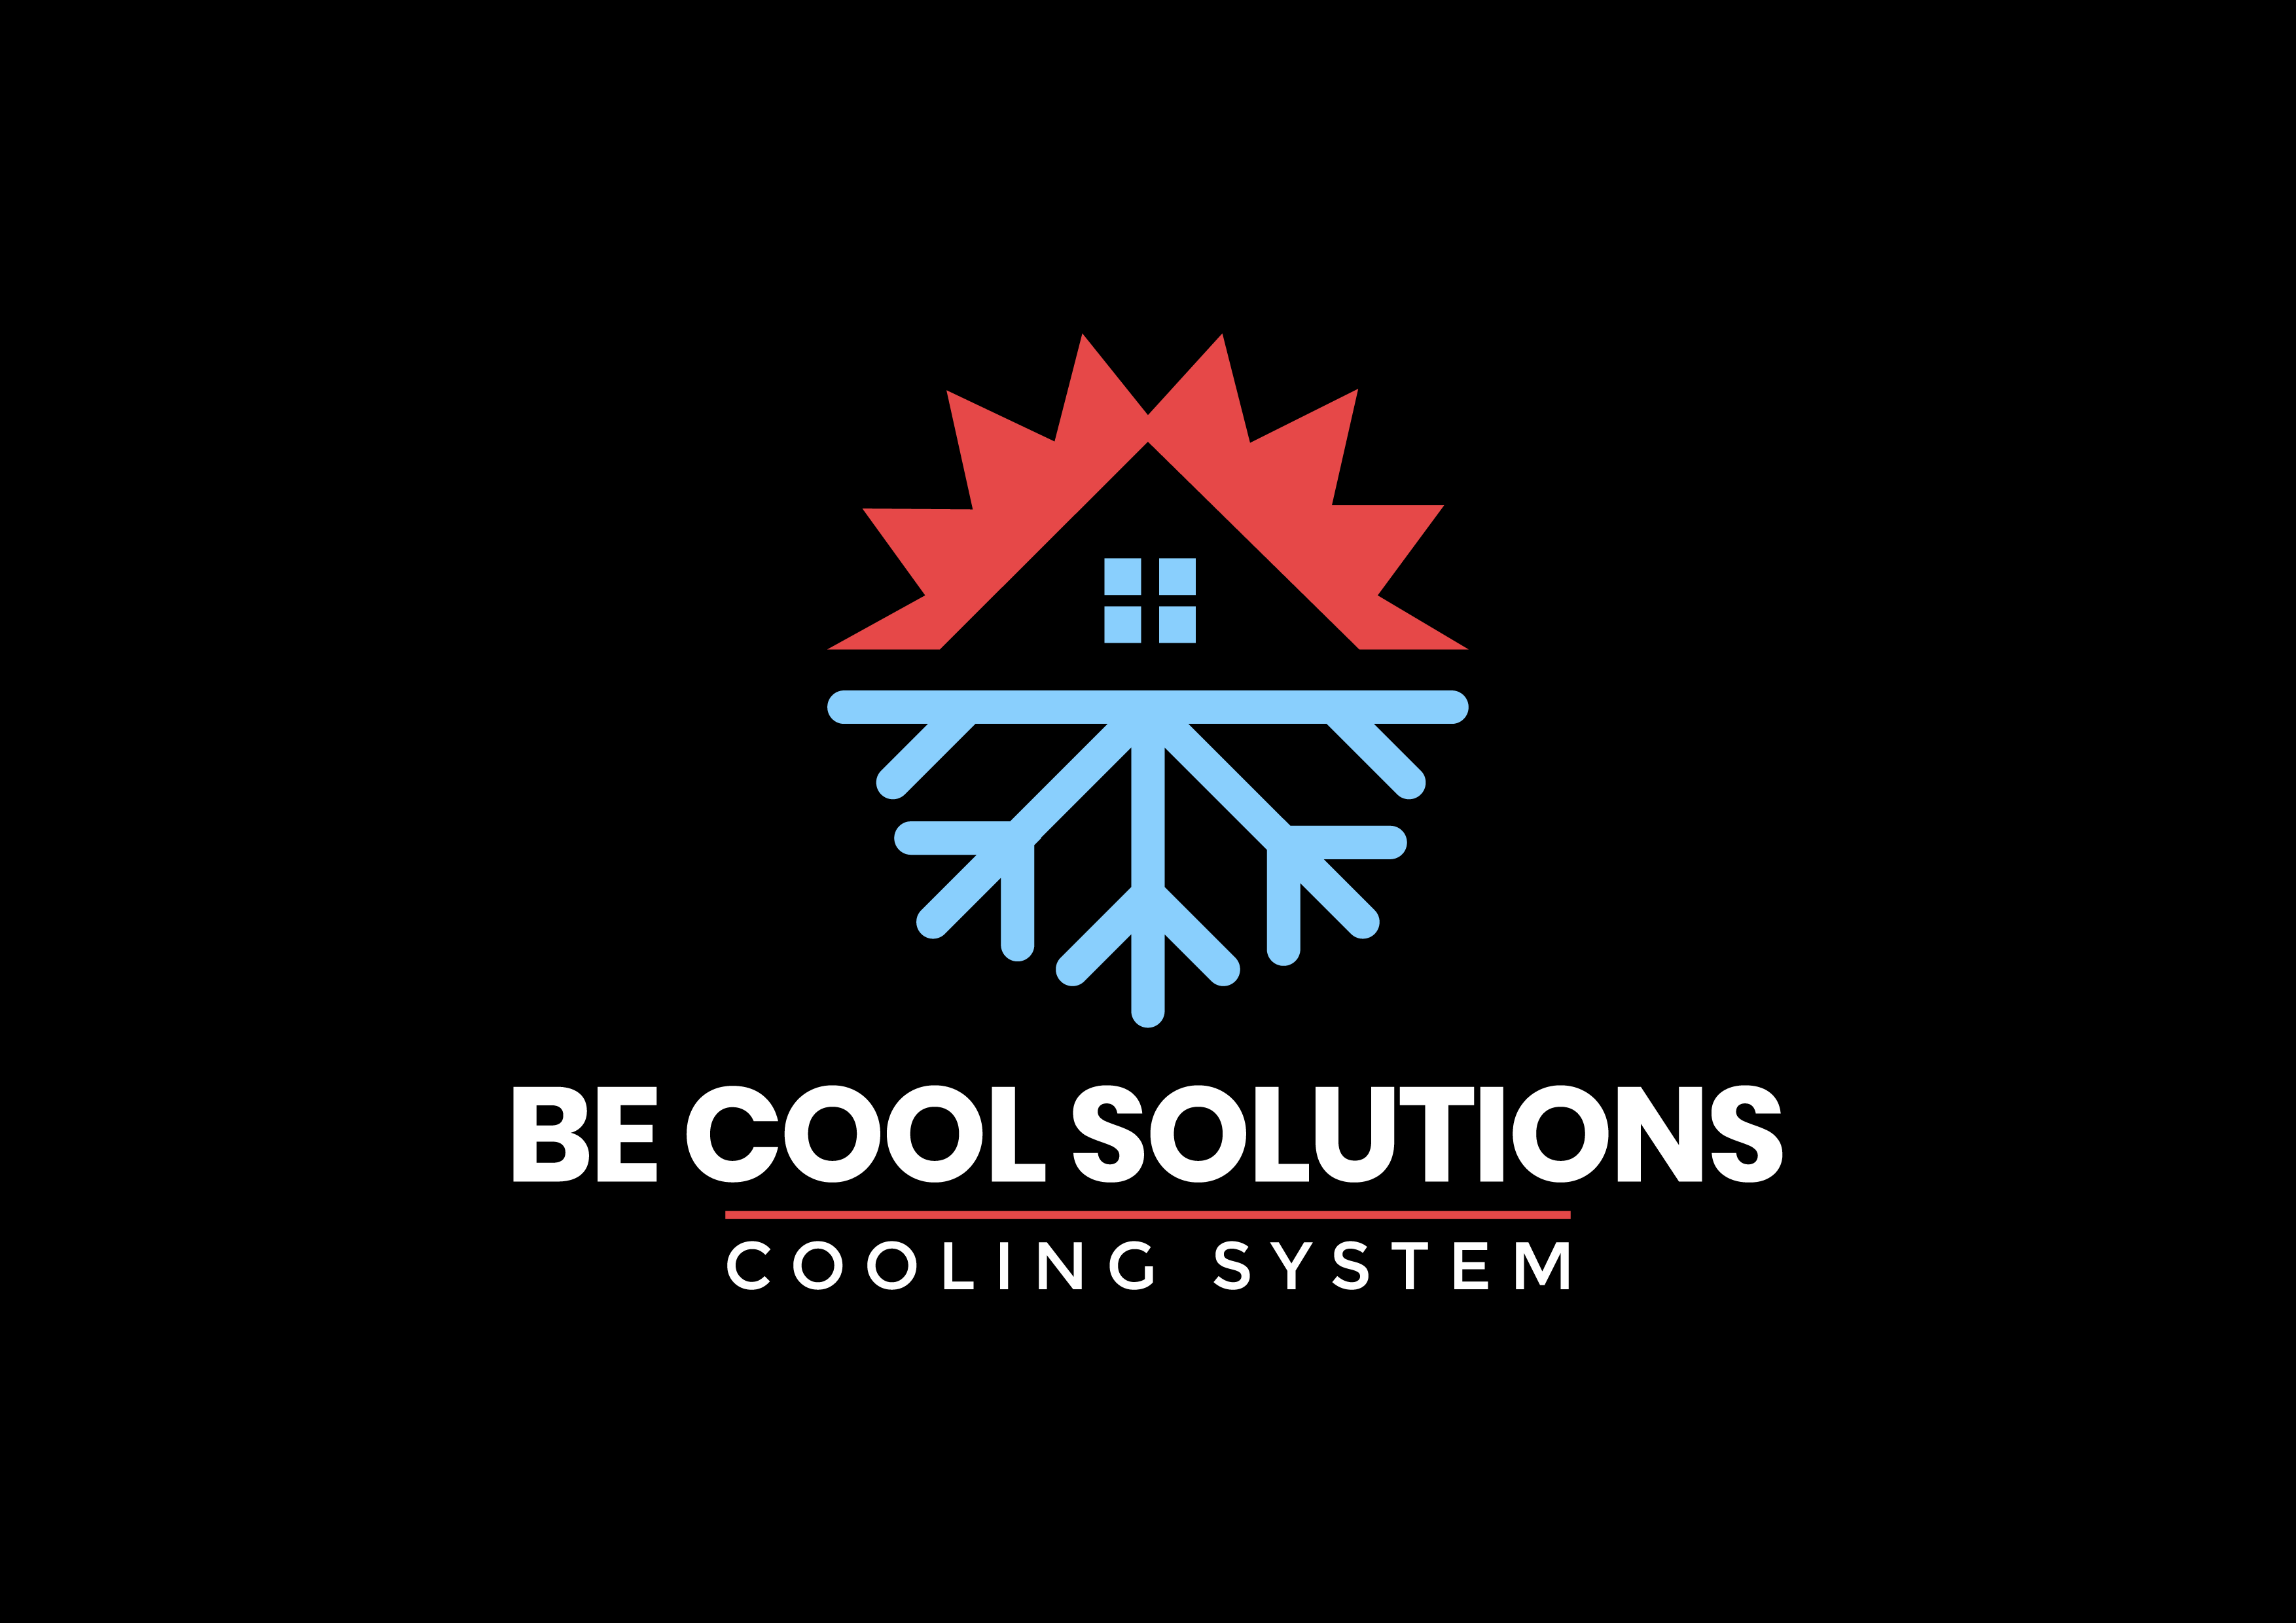 installateurs van airconditioning Overijse Be Cool Solutions